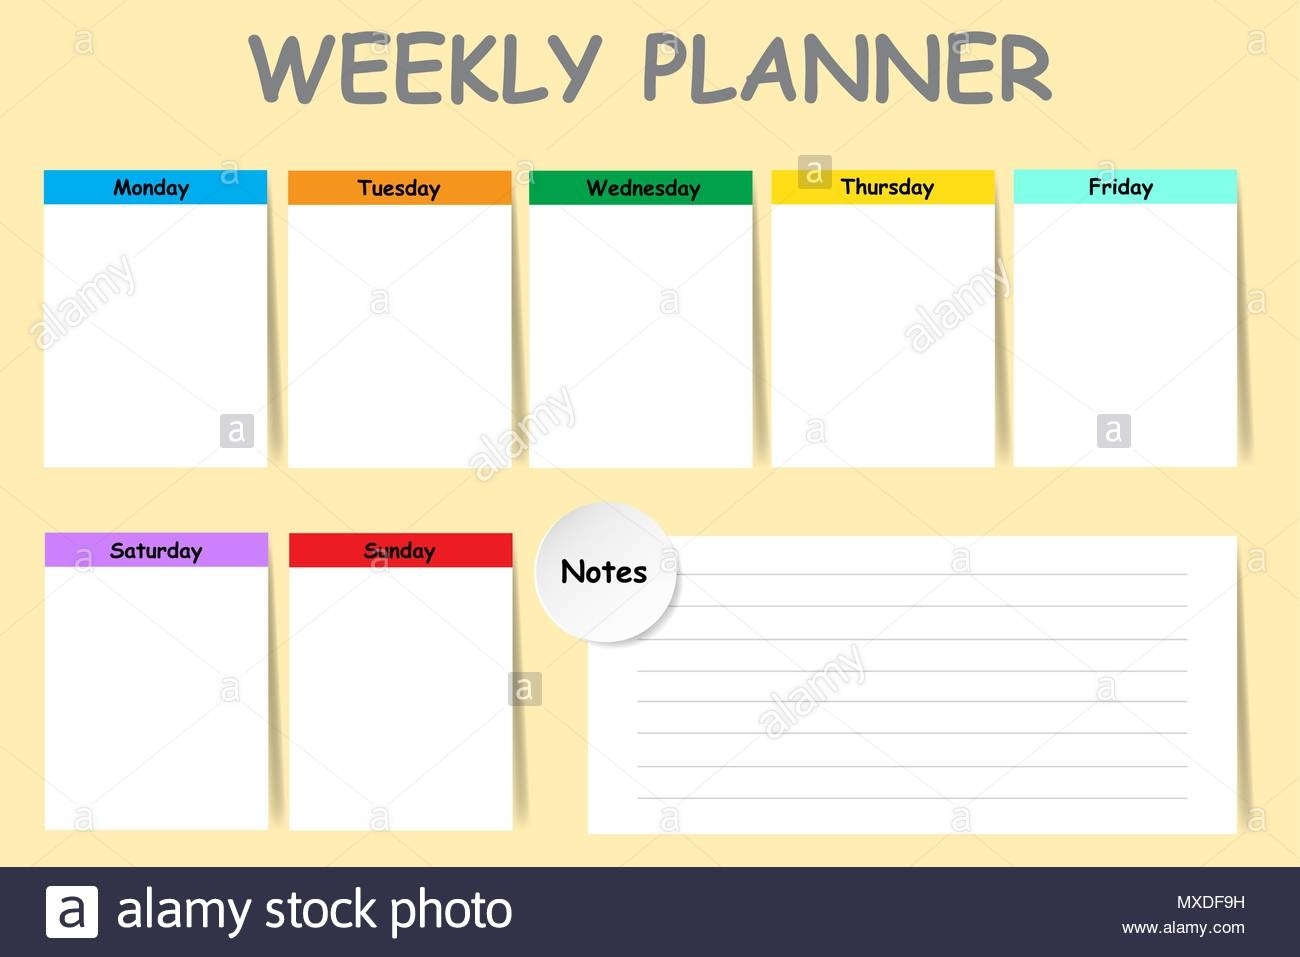 Weekly Planner With A Chart For Notes And White Charts For